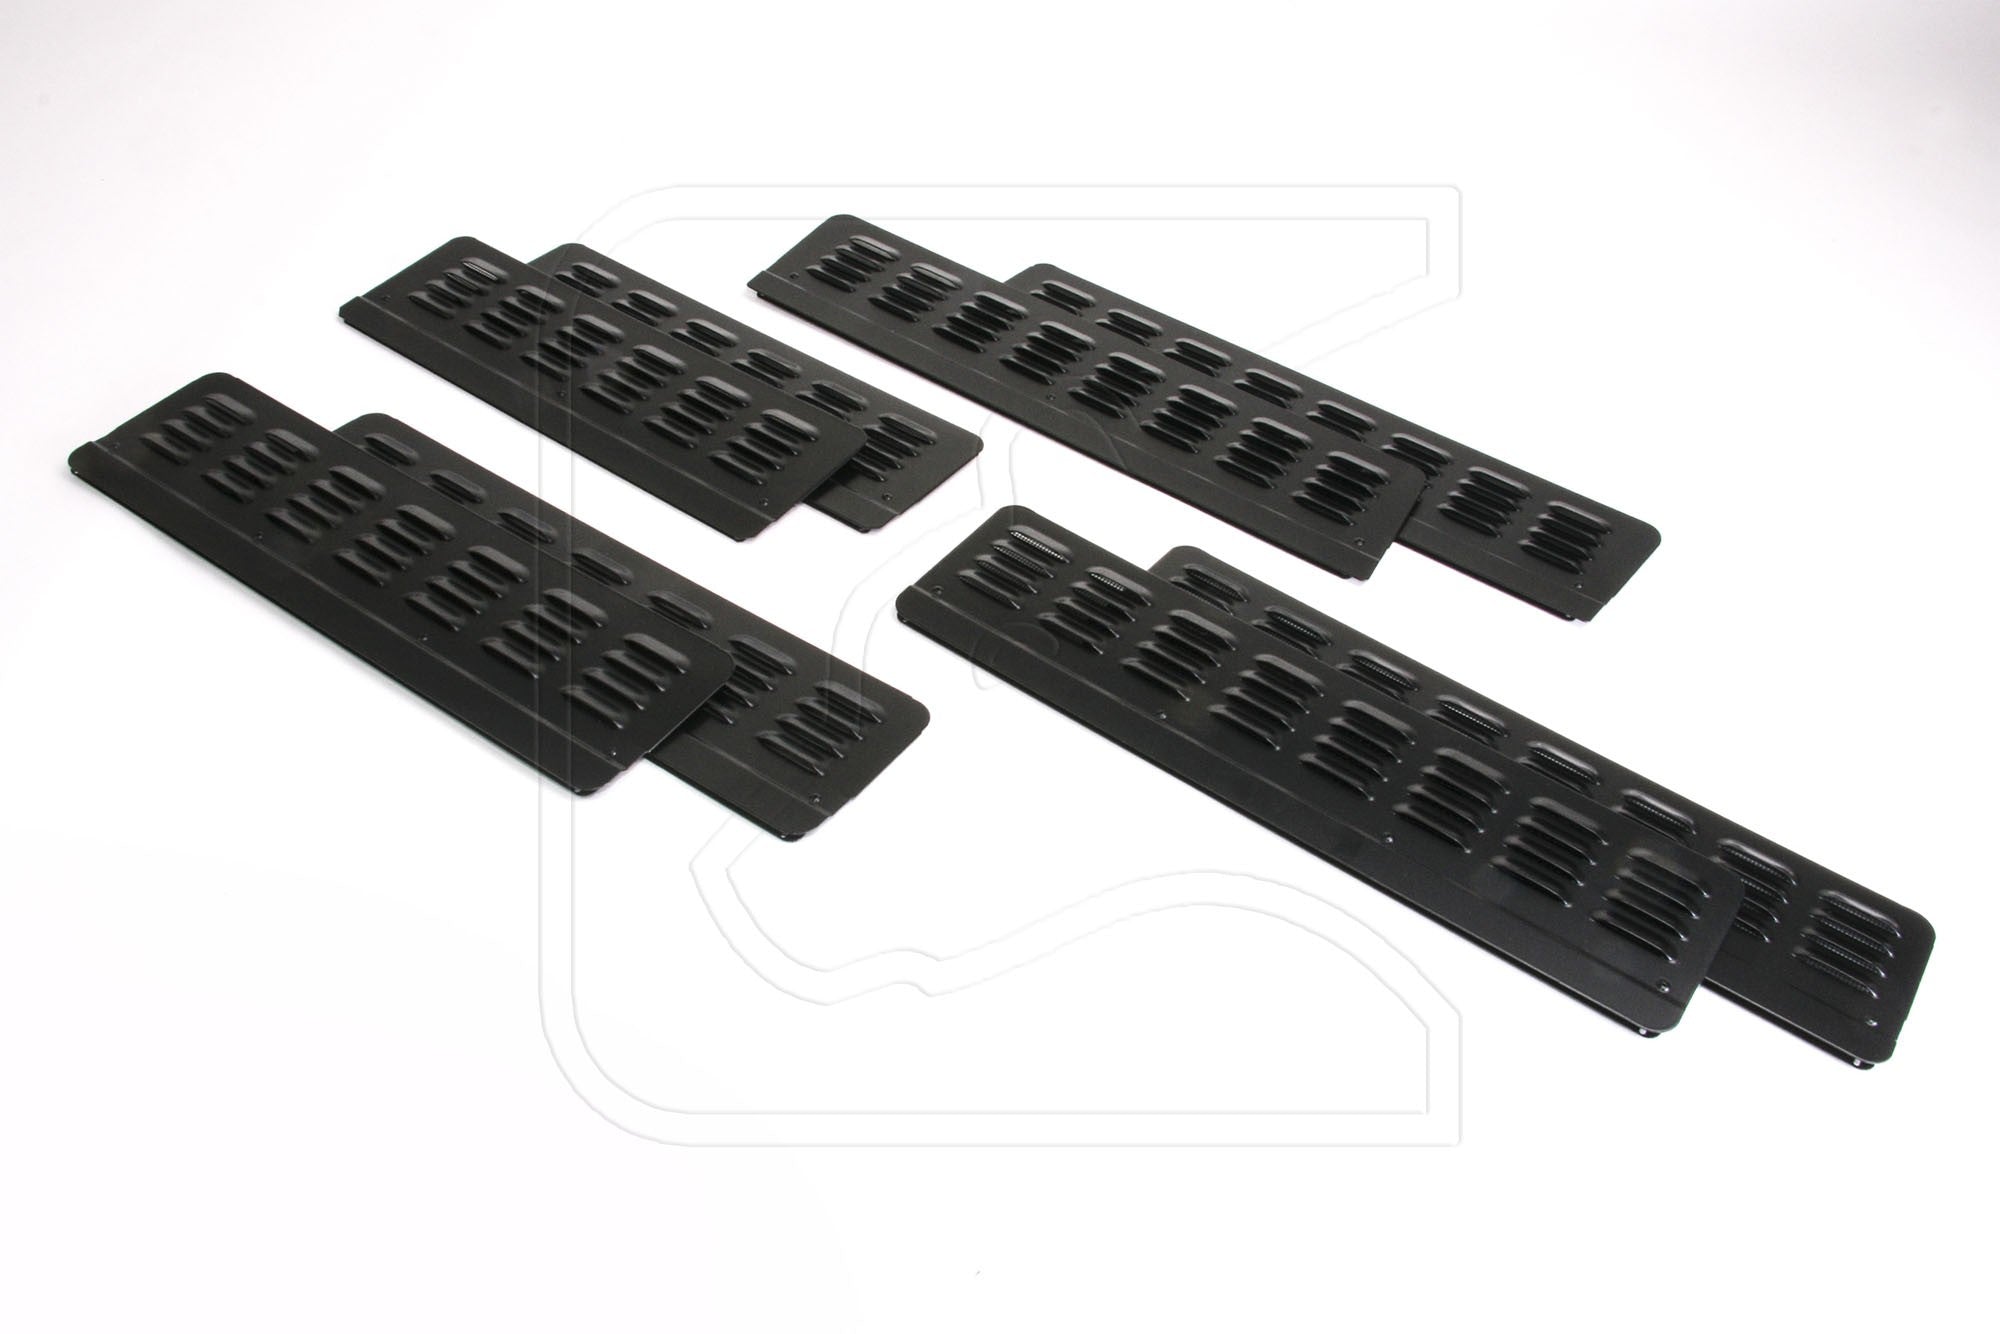 NEW Defender, 2nd Row Doors Window Vents/Screens - for Land Rover 110/130 (set of 2) [L663 from Model Year 2020+]